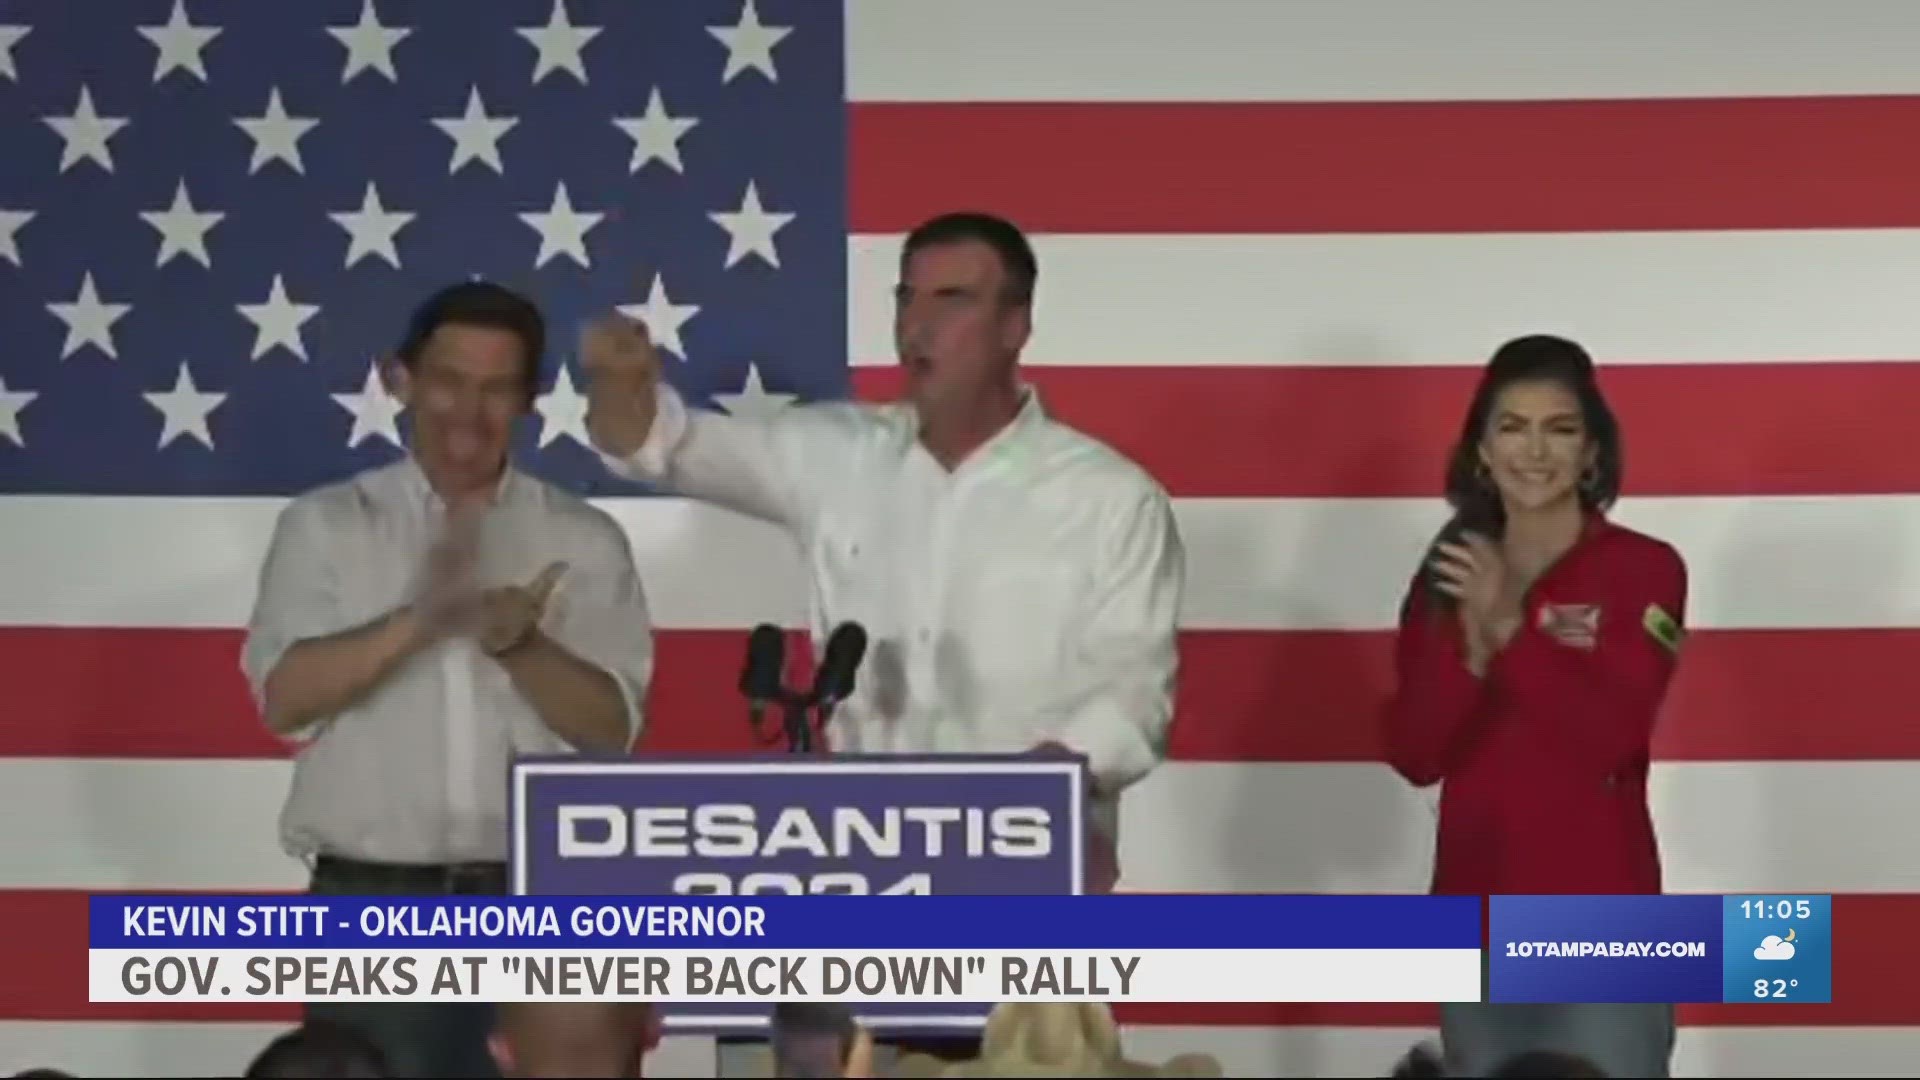 DeSantis says his record has put him at the cutting edge of the next generation of Republicans.